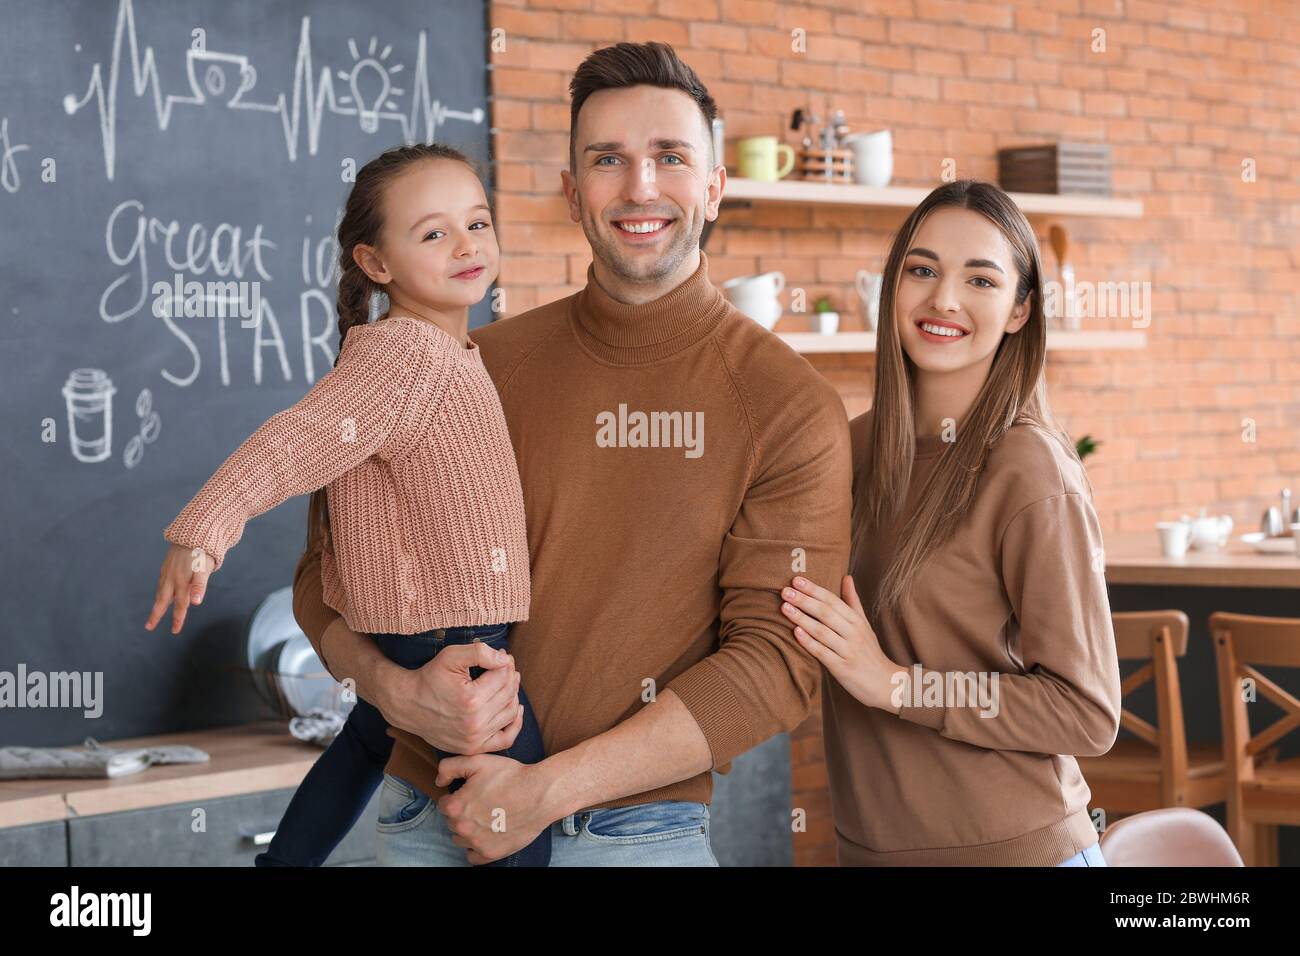 Happy family spending time together in kitchen Stock Photo